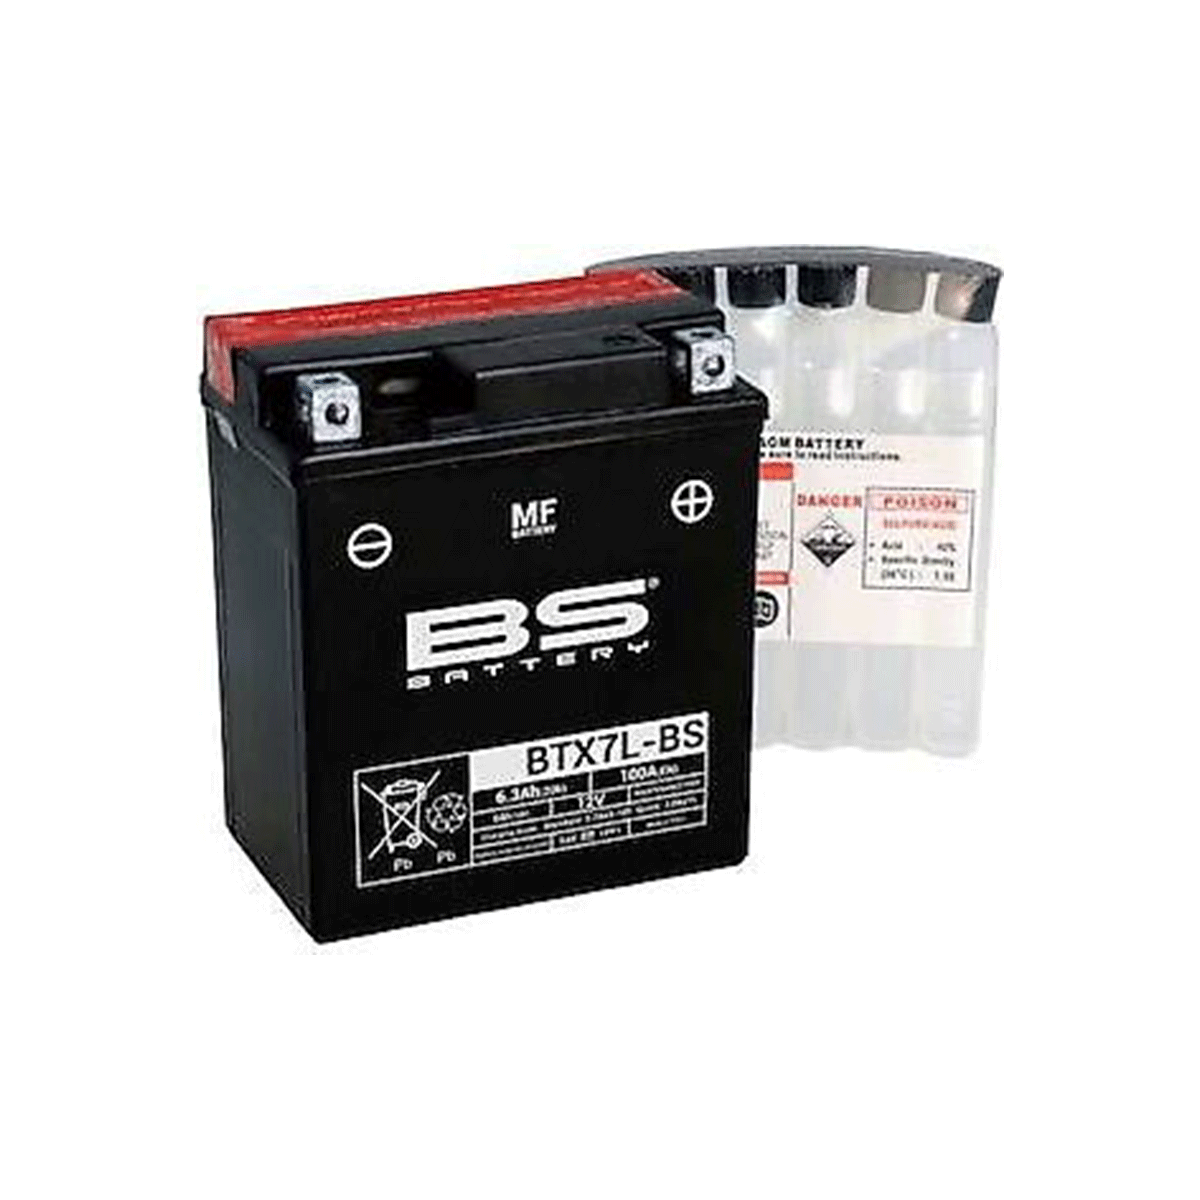 Bs battery. Gt9l BS dong Jing аккумулятор. Gt9l-BS аккумулятор. Мото аккумулятор ZDF ytx7l-BS 7 Ач. Аккумулятор BS-Battery btz10s-BS.